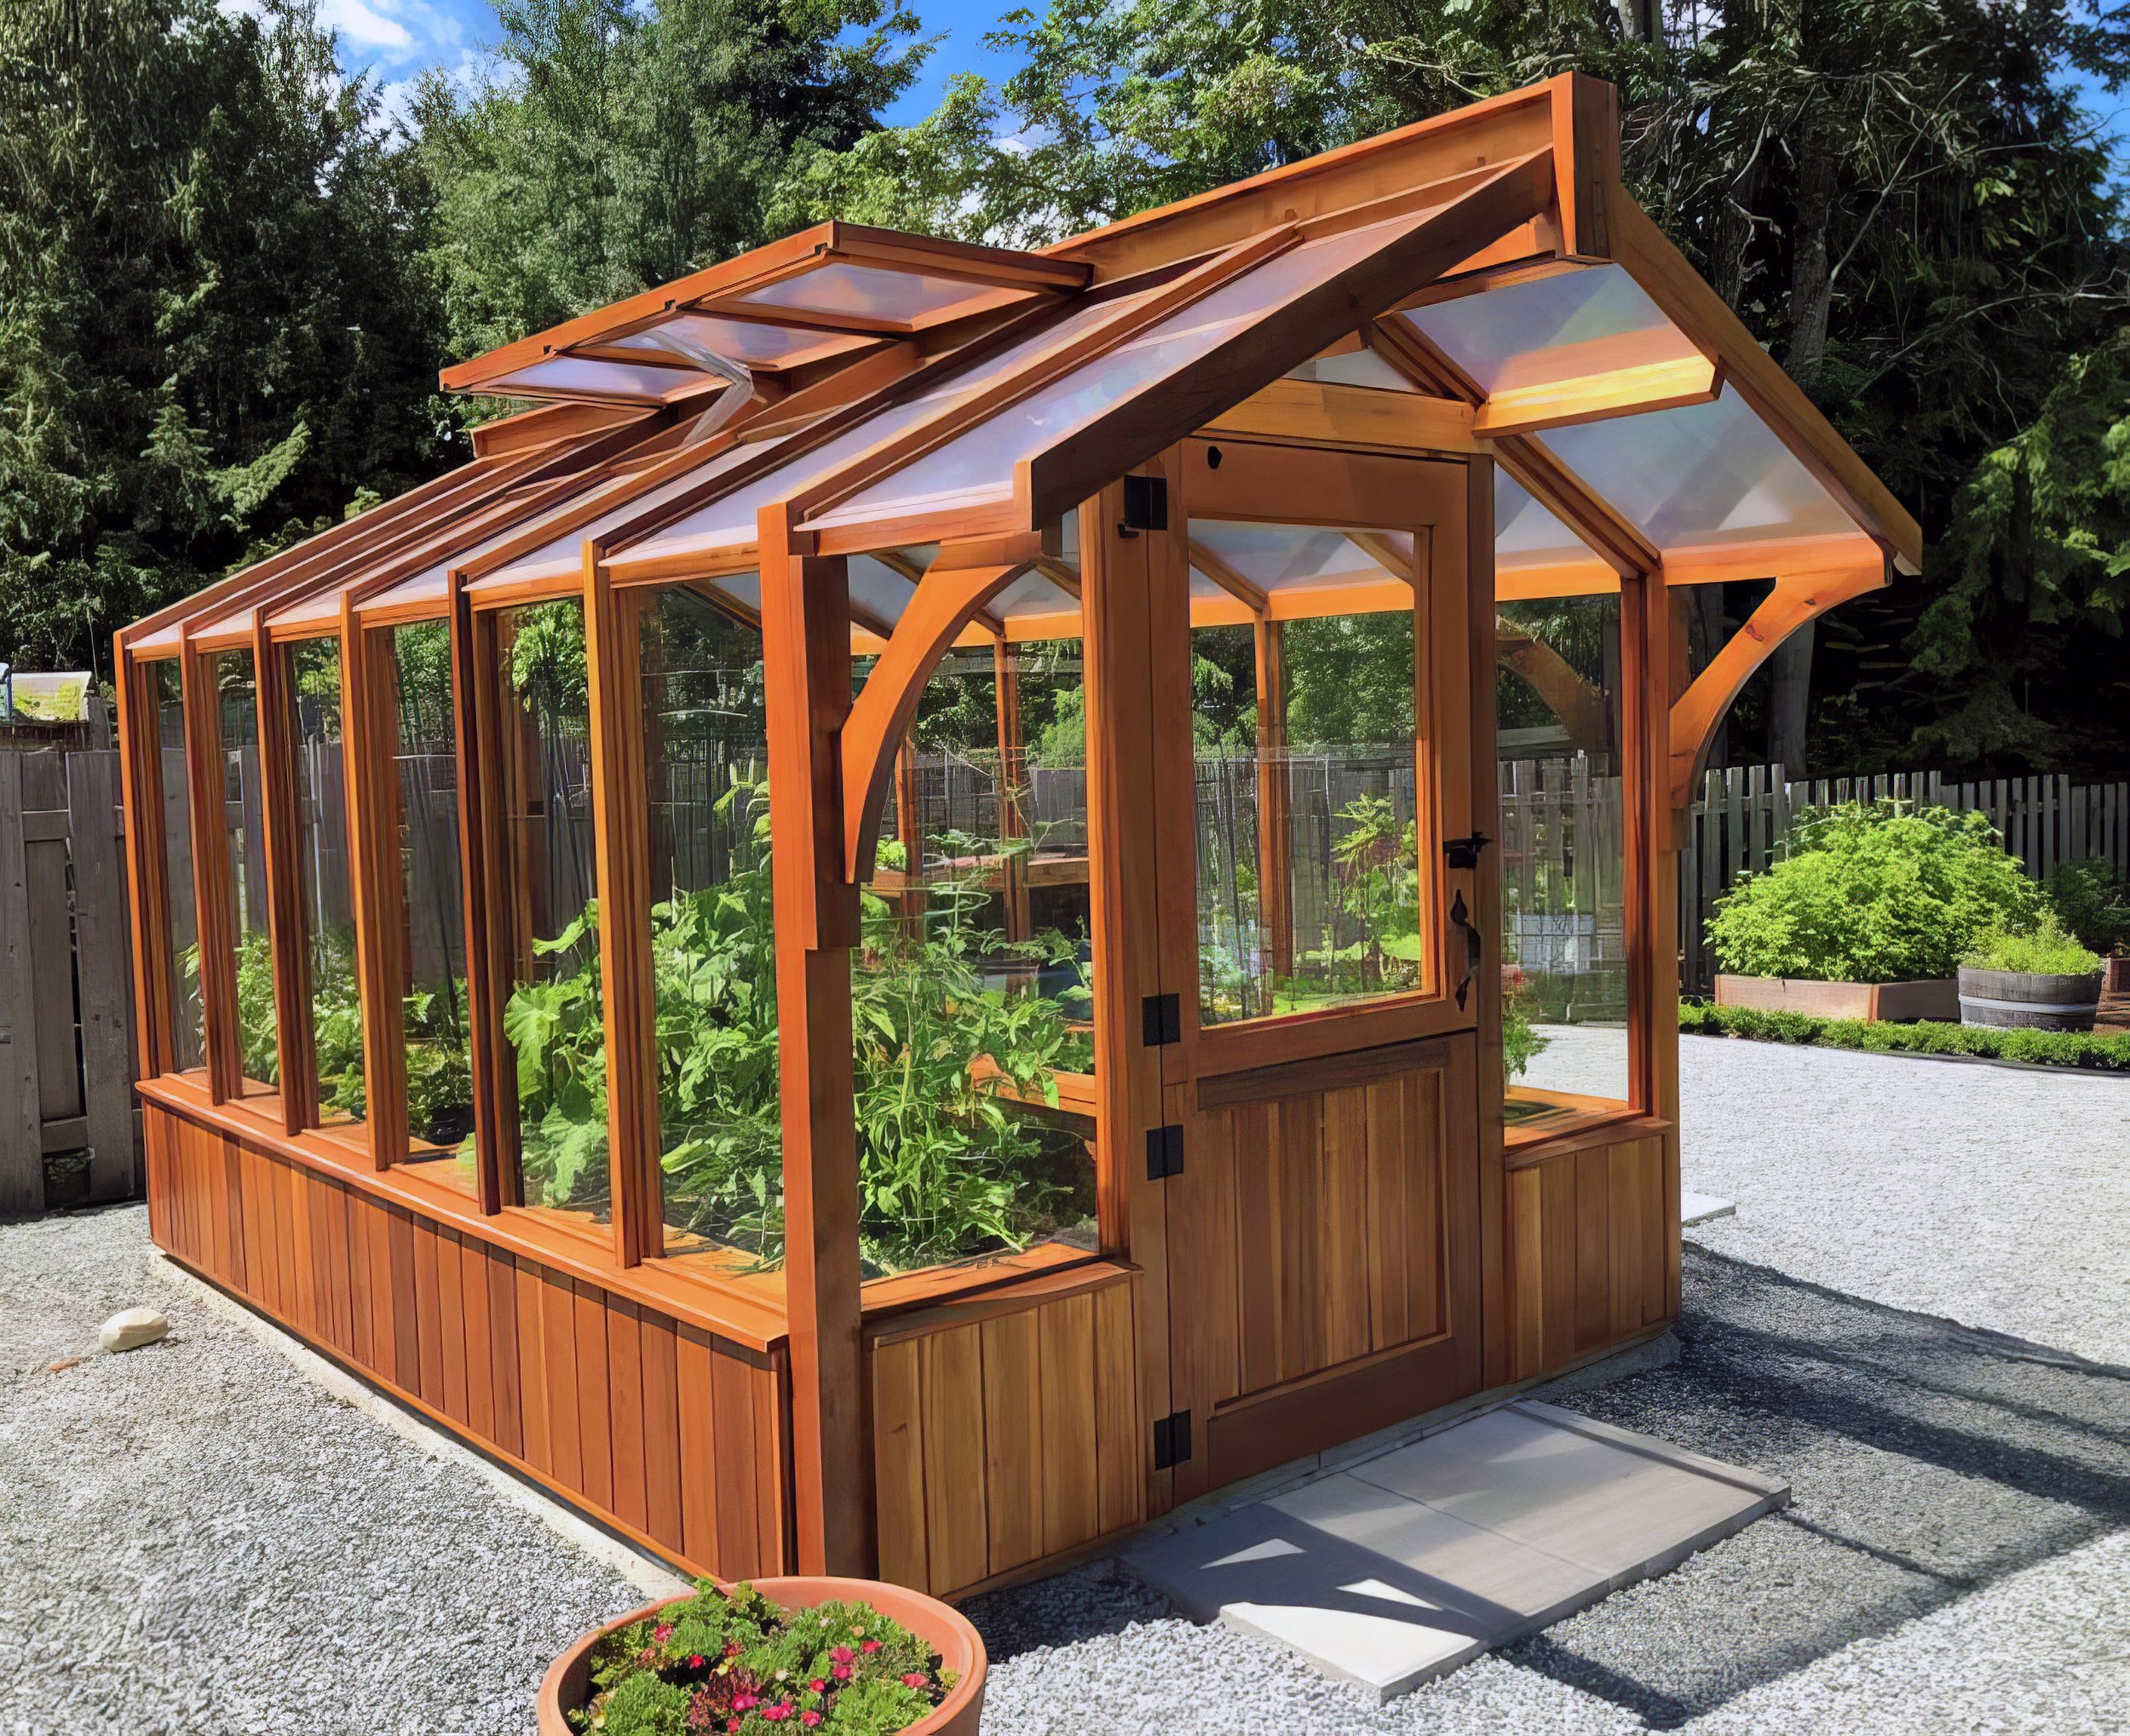 How To Build A Wooden Greenhouse